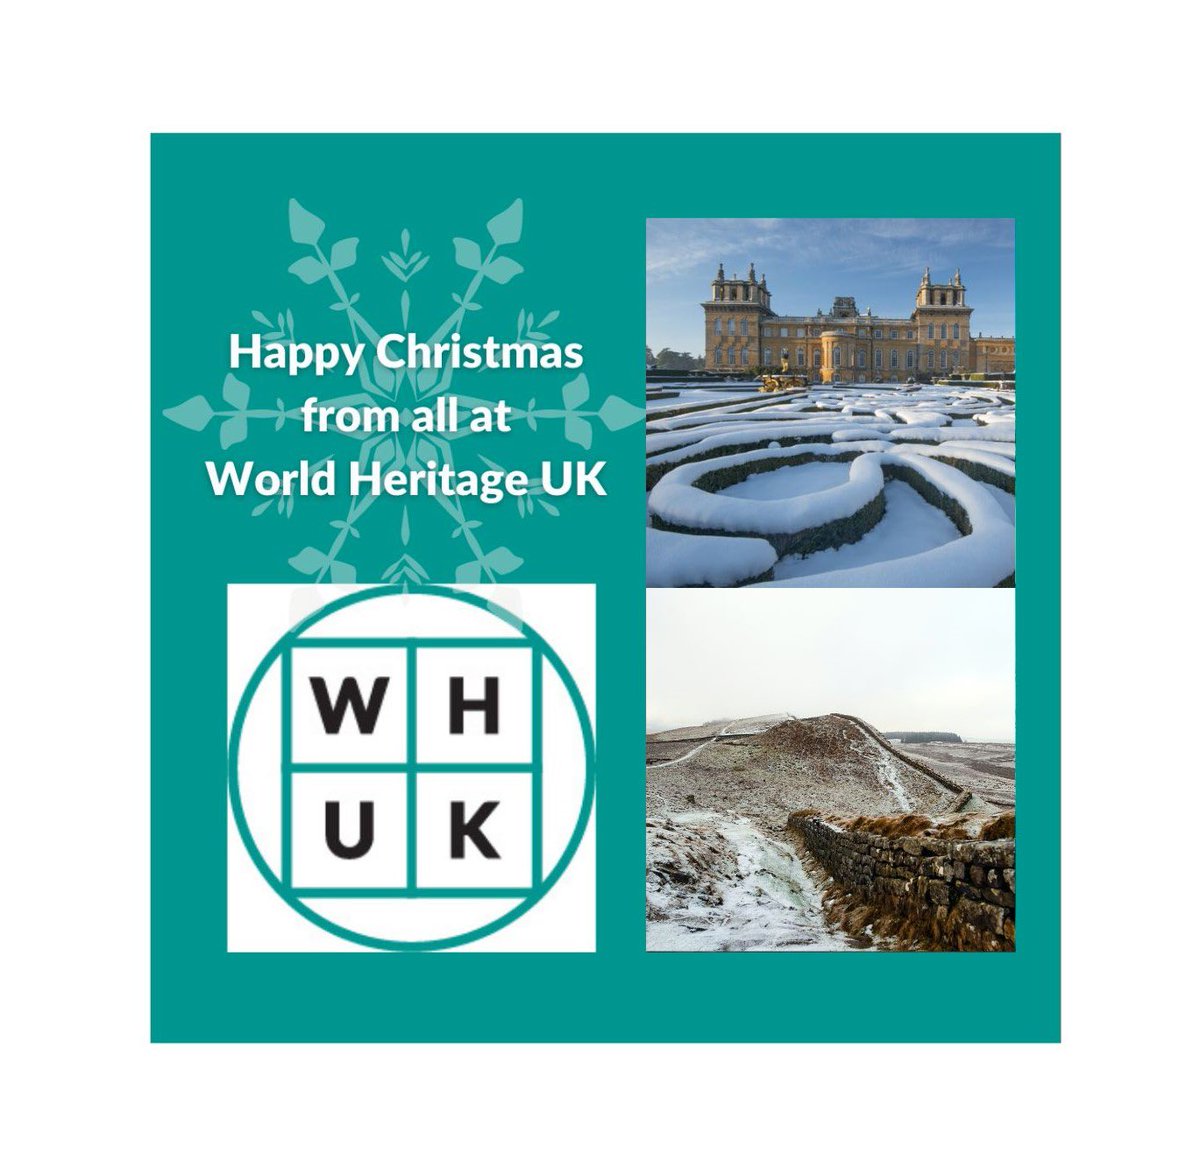 The Trustees, staff and volunteers of World Heritage UK would like to wish all members, stakeholders and partners a very happy Christmas 🎄 We have an exciting 2024 programme planned and look forward to seeing you soon. WHUK will be taking a break from 21 December to 1 January.